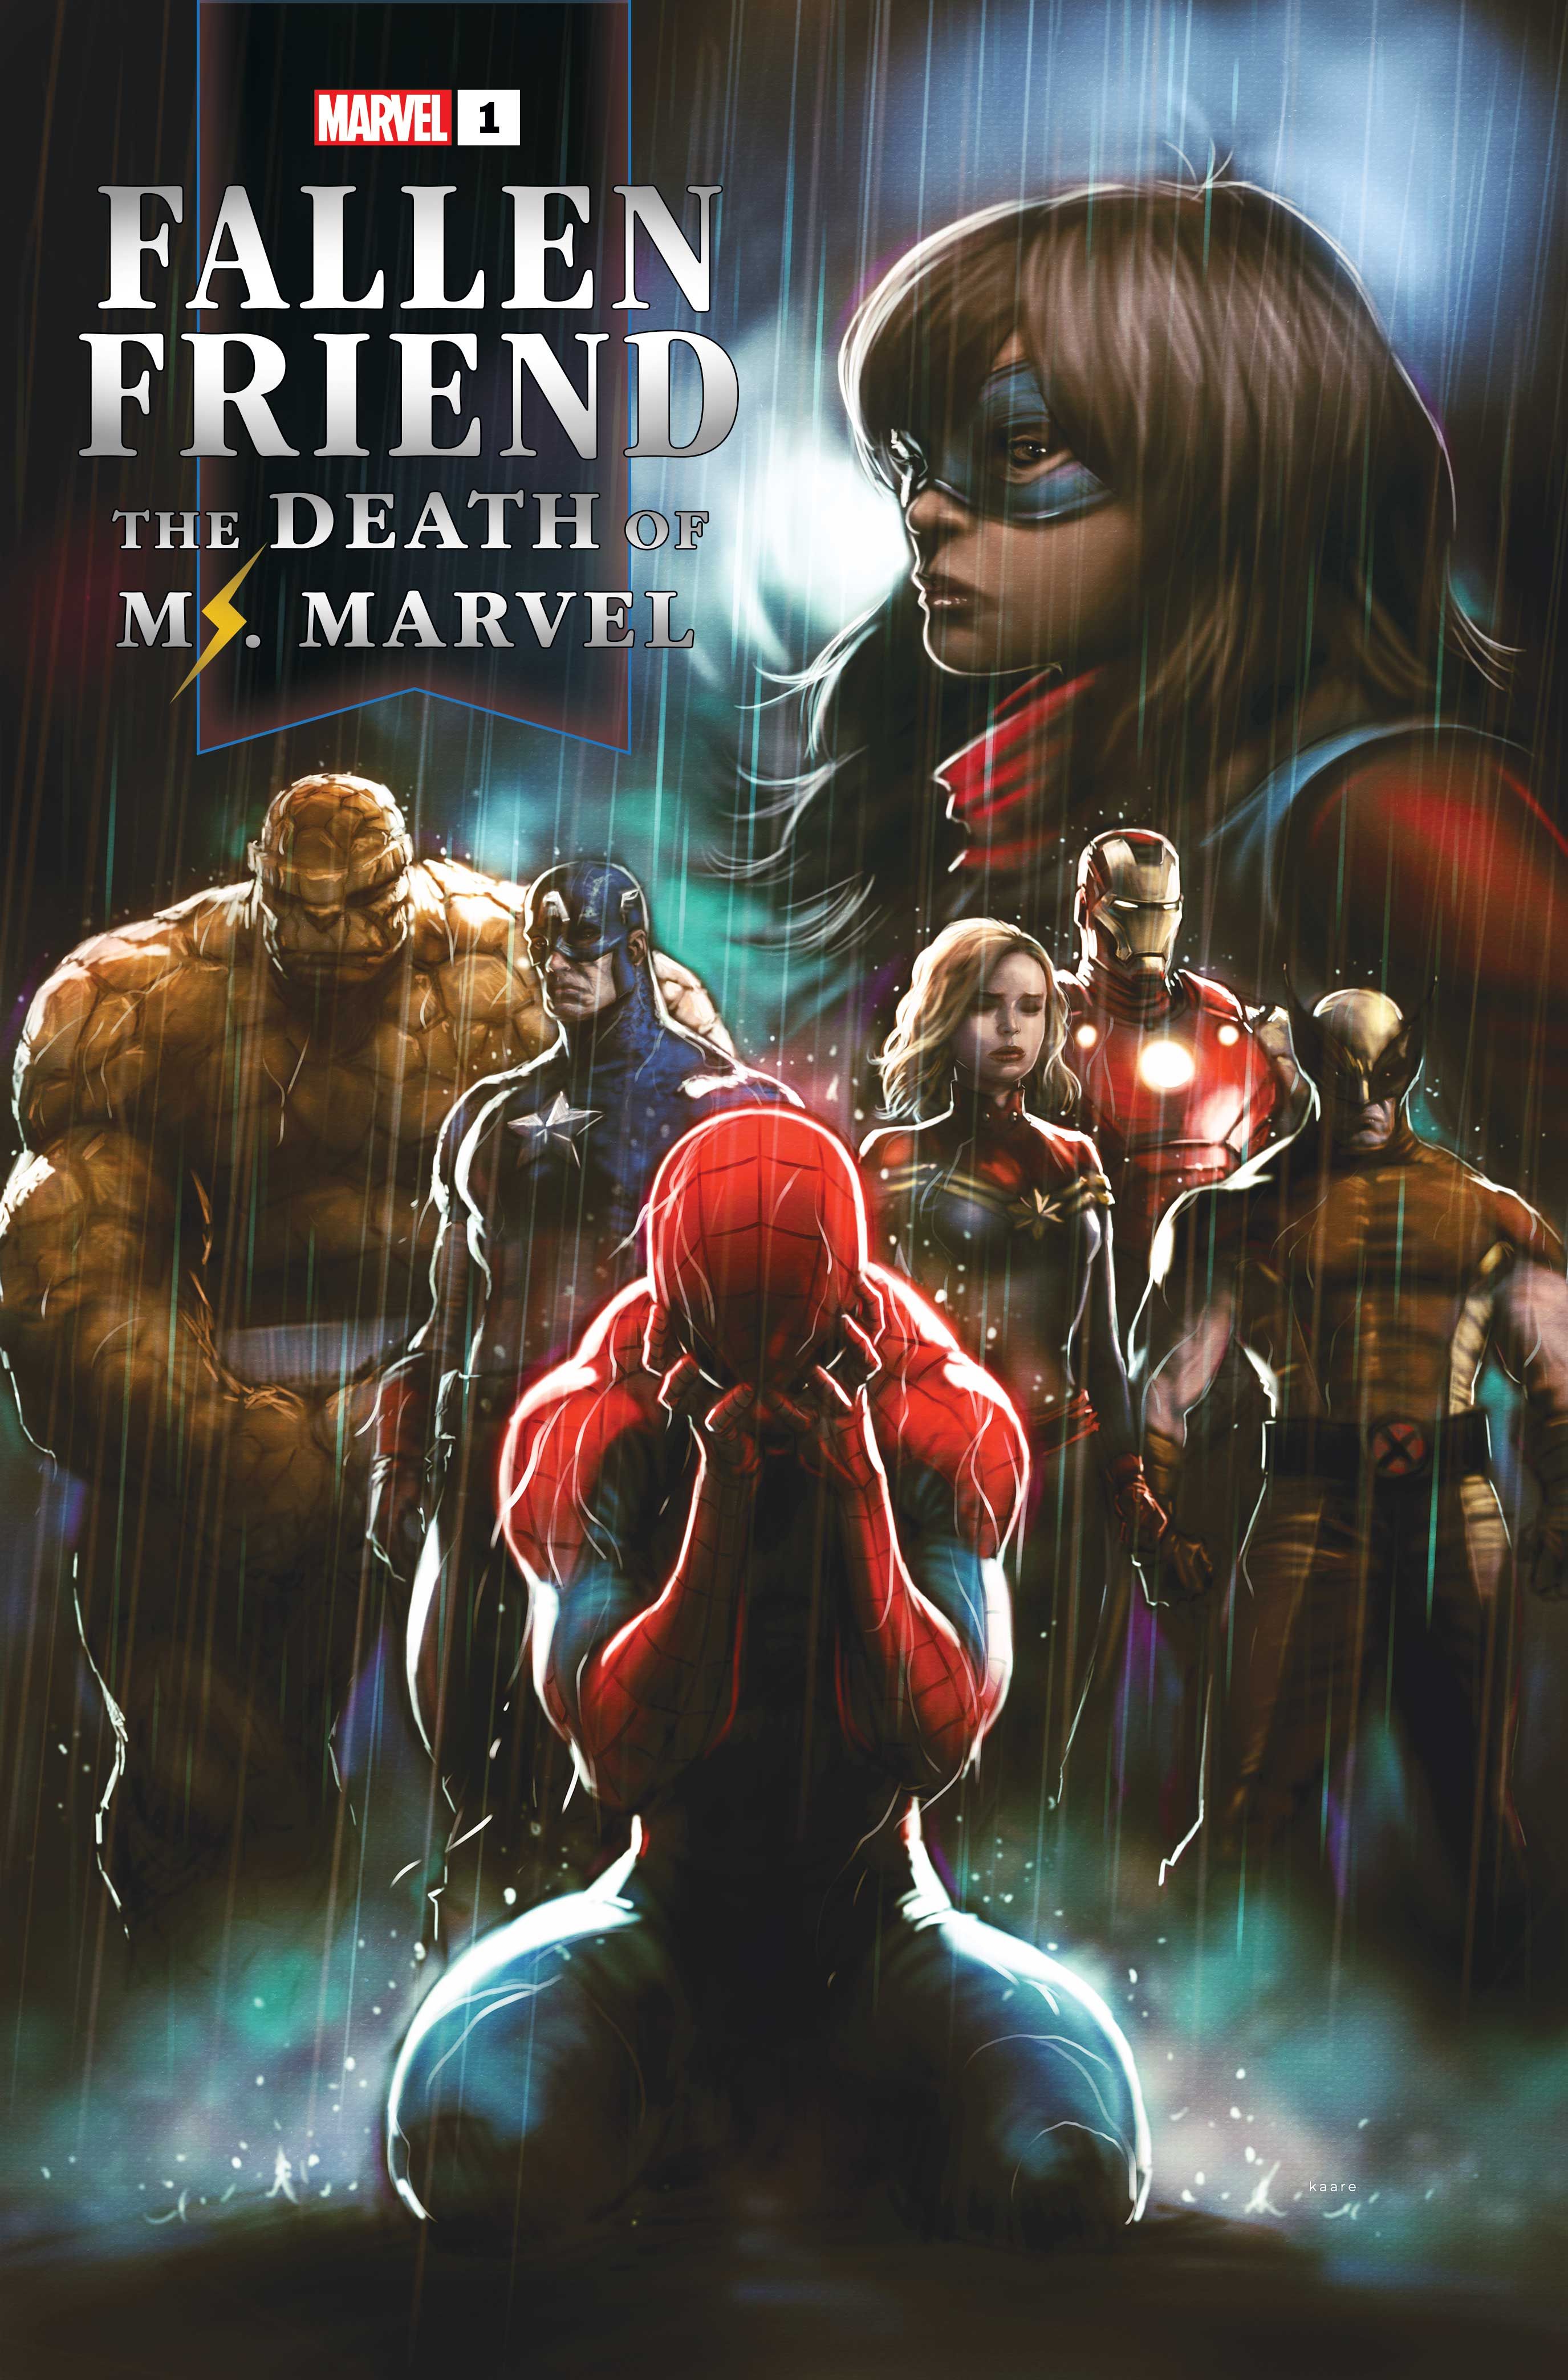 peter parker and his fellow heroes mourning the loss of ms marvel on the cover of "fallen friend death of ms marvel"